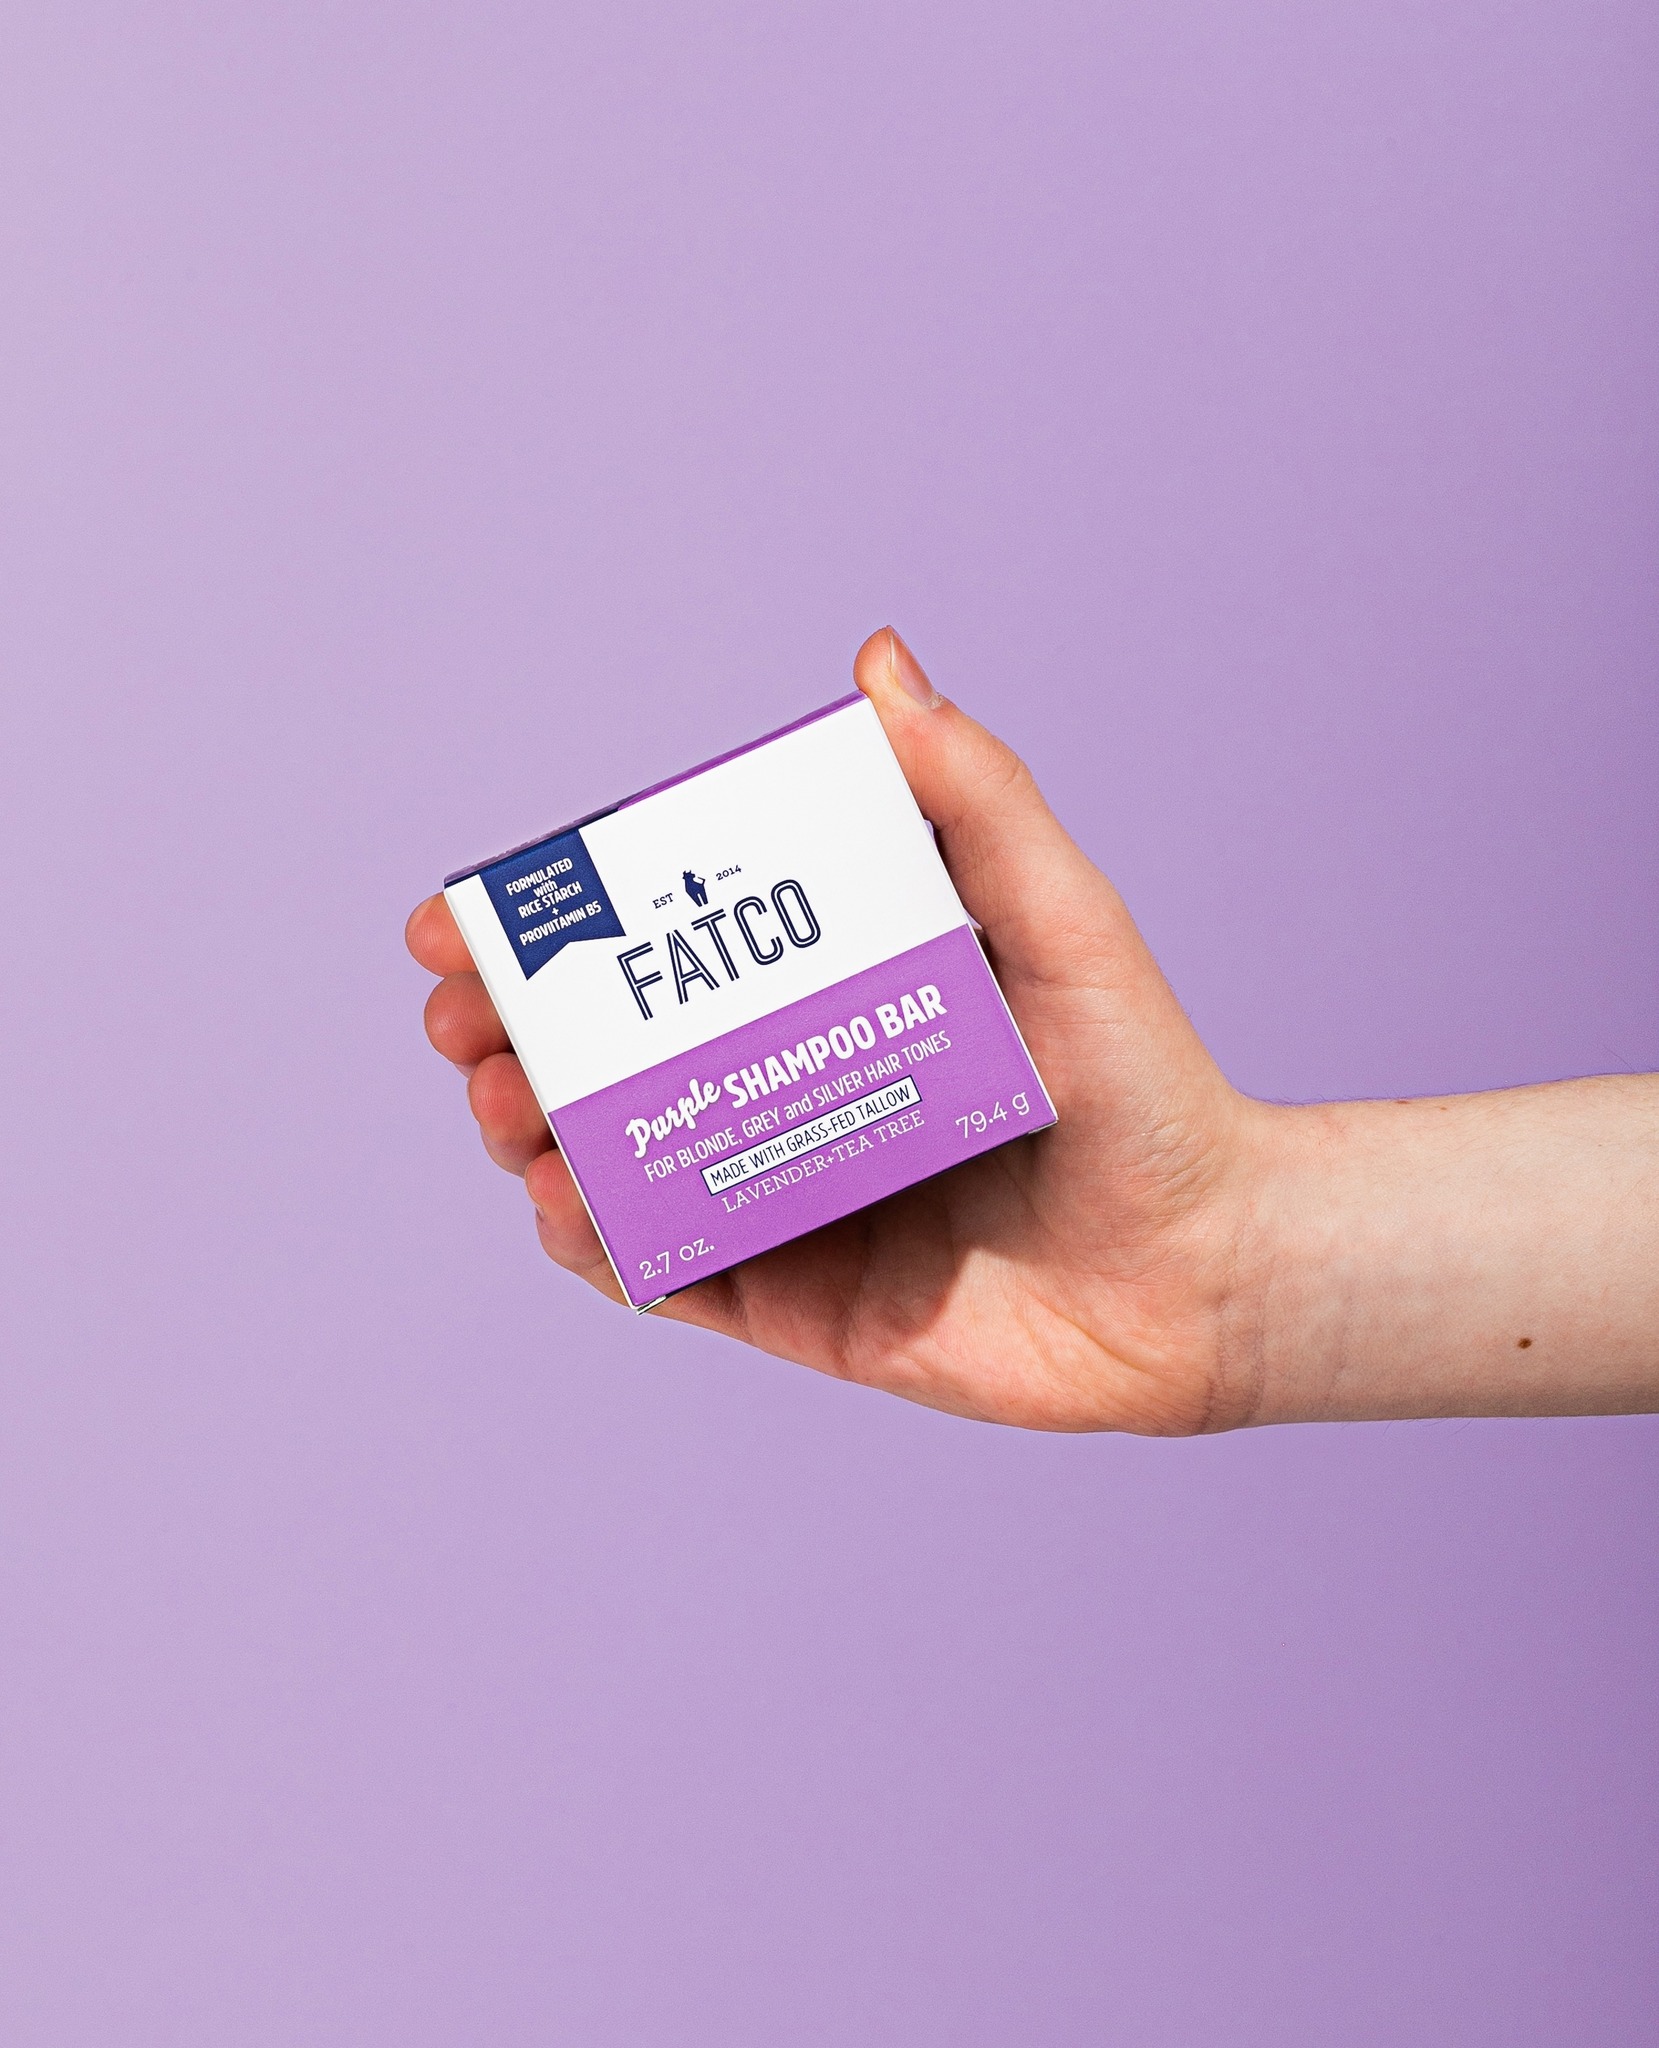 FATCO - Building one of America's Leading Beef Tallow Skin Care Brands.